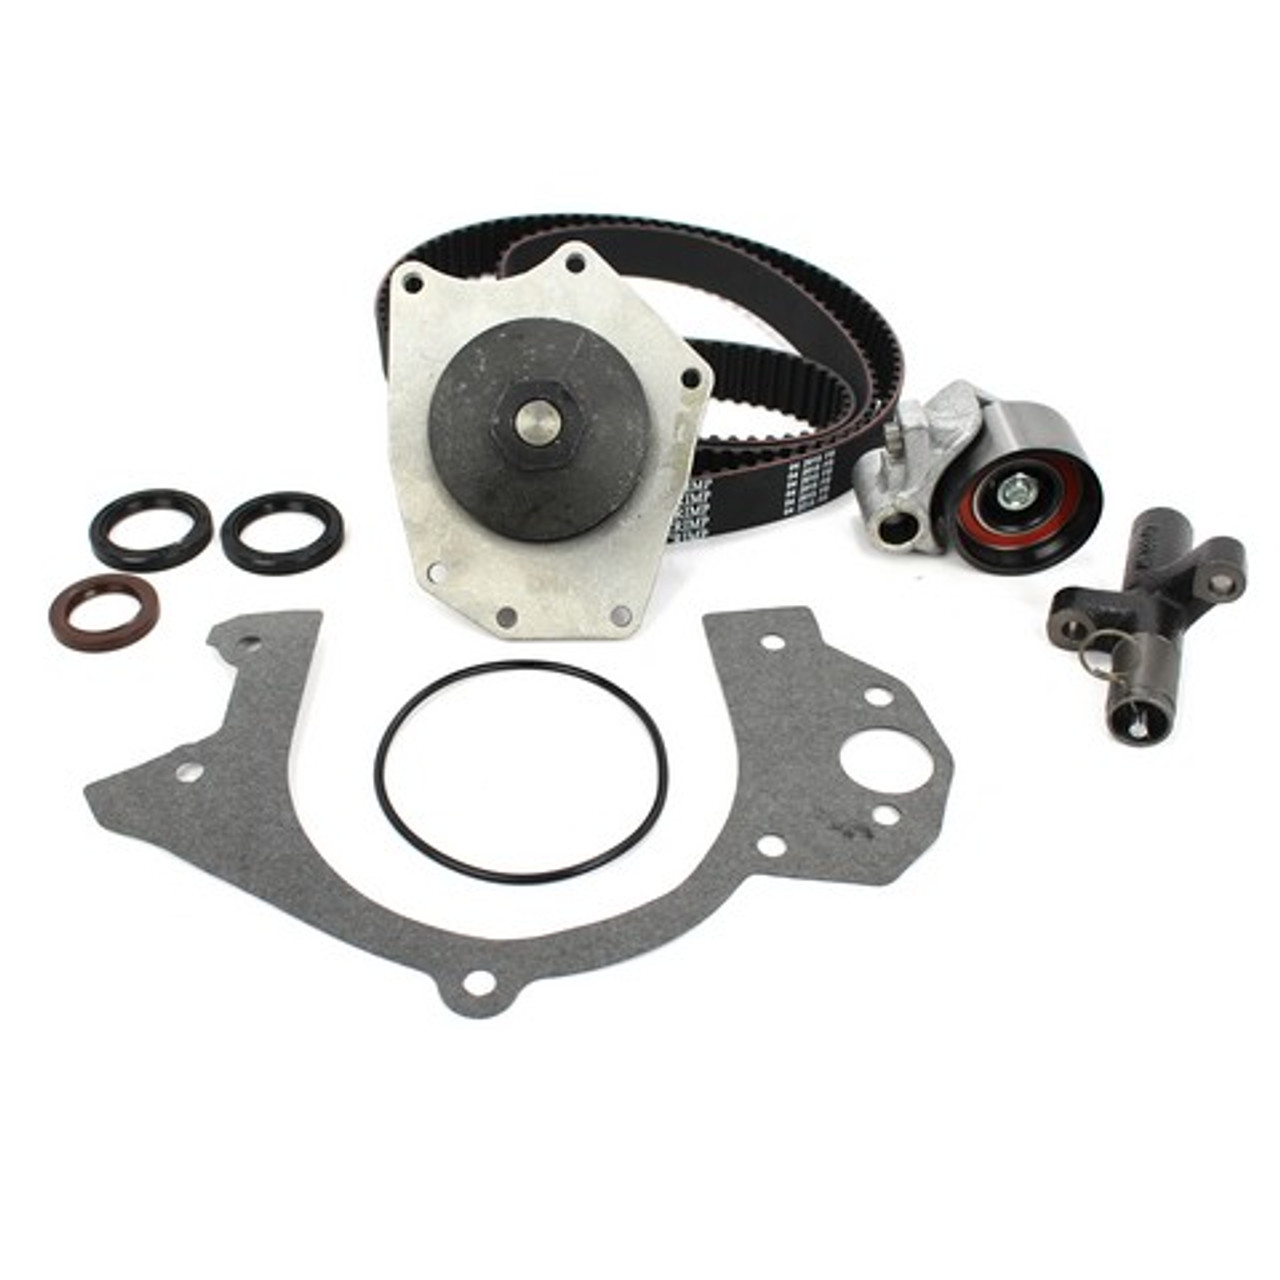 Timing Belt Kit with Water Pump 3.5L 1997 Dodge Intrepid - TBK1145BWP.3